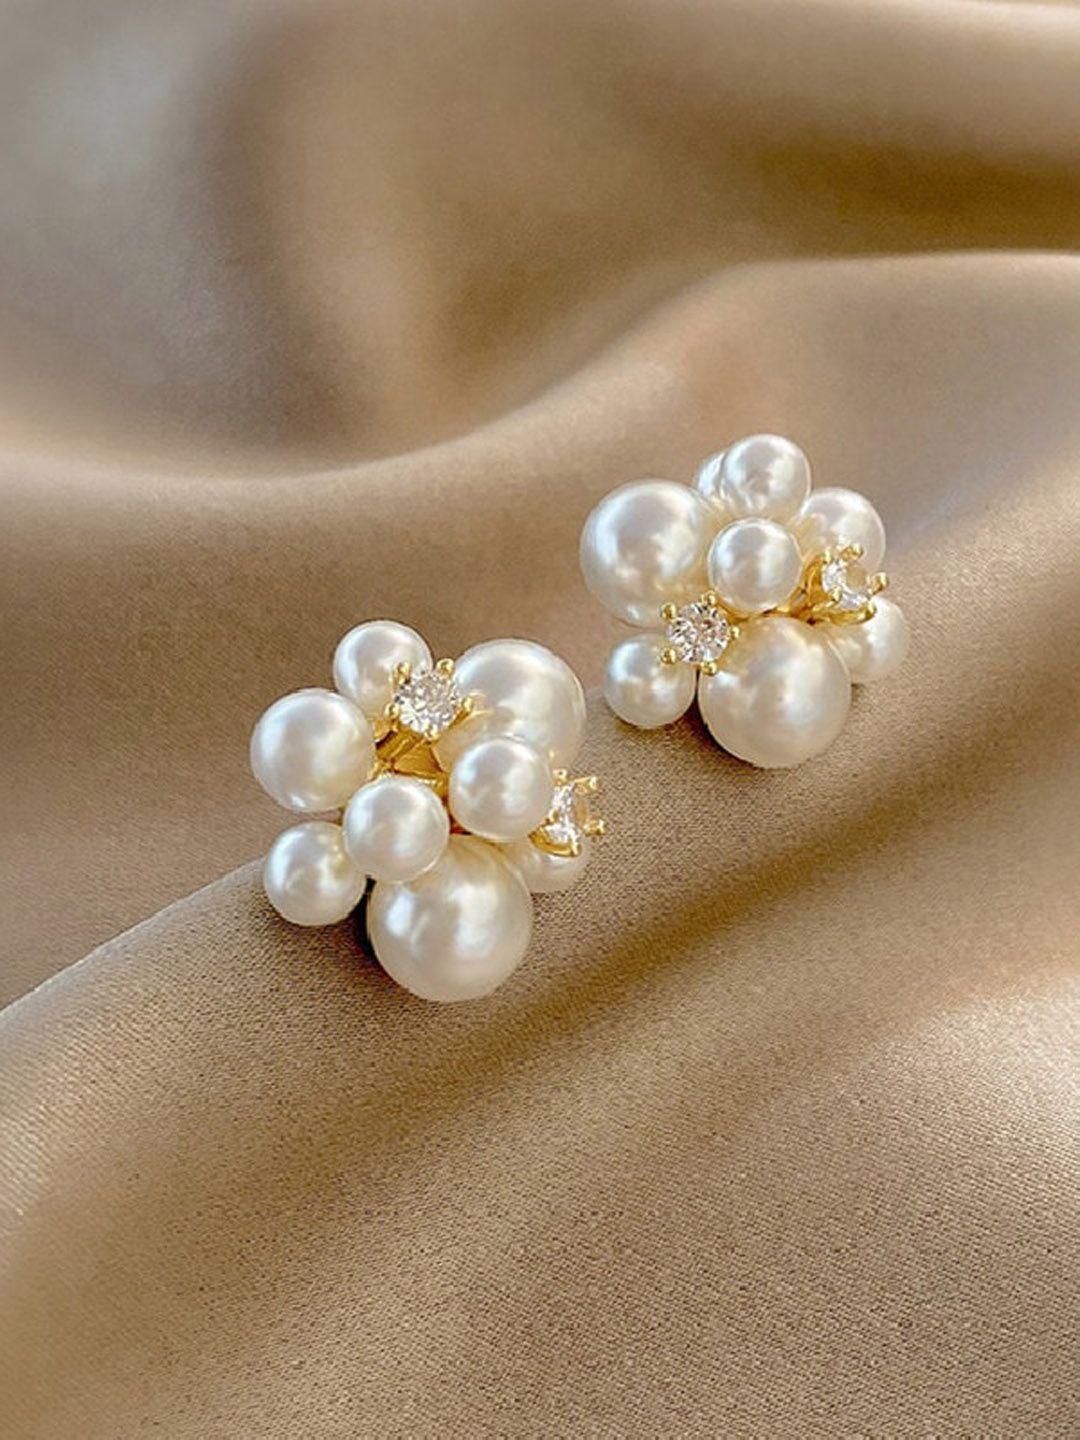 Shining Diva Fashion Gold Plated Beaded Studs Earrings